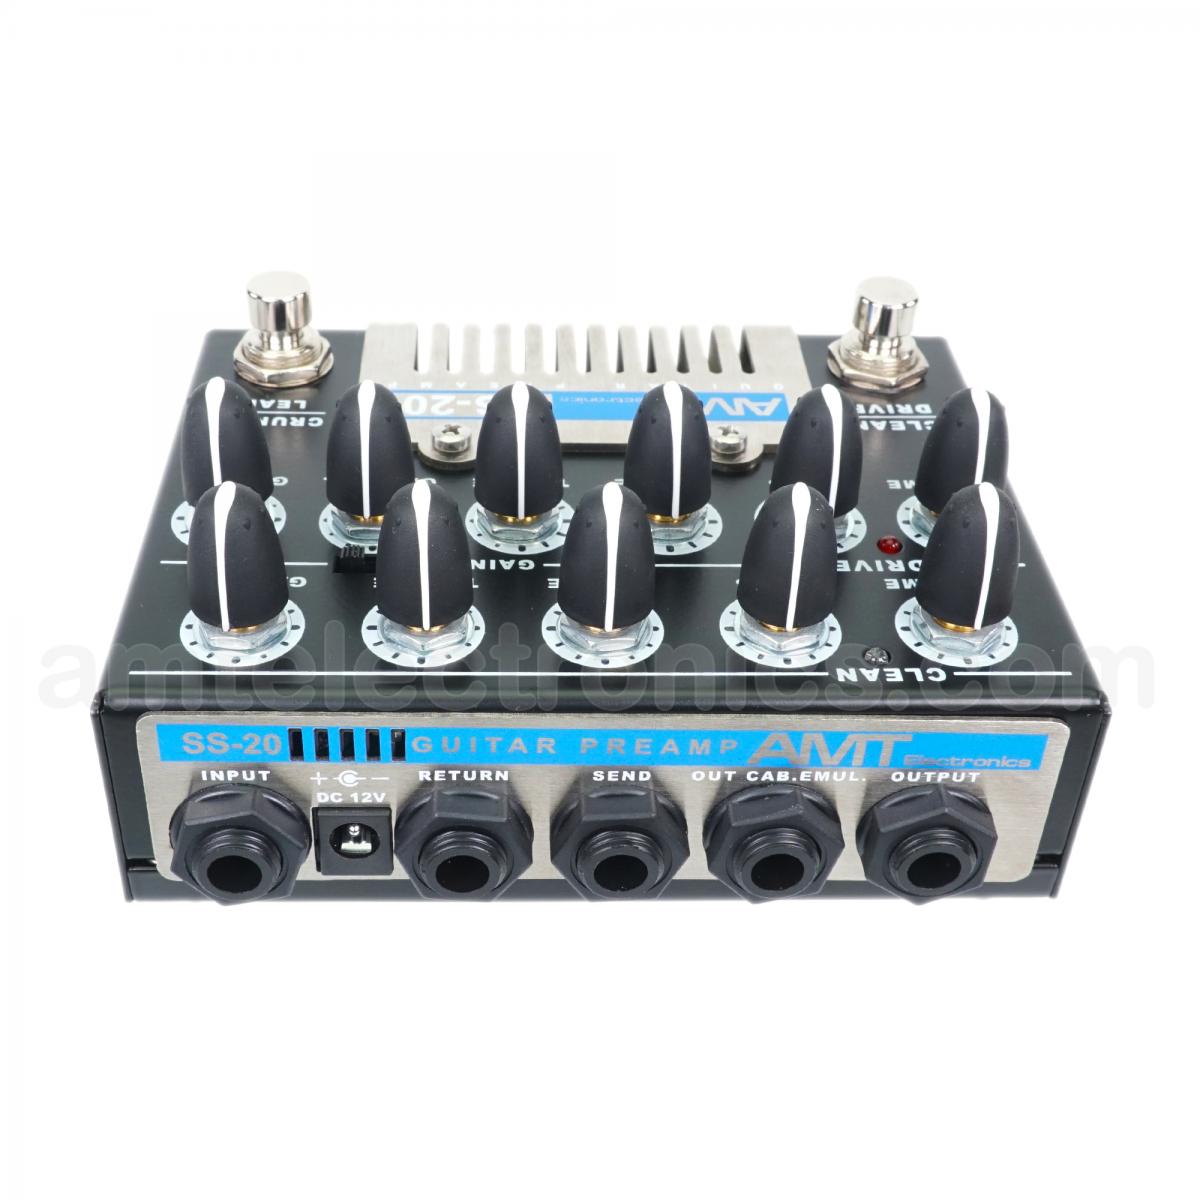 AMT SS-20 (Studio Series preamp) | AMT Electronics official website